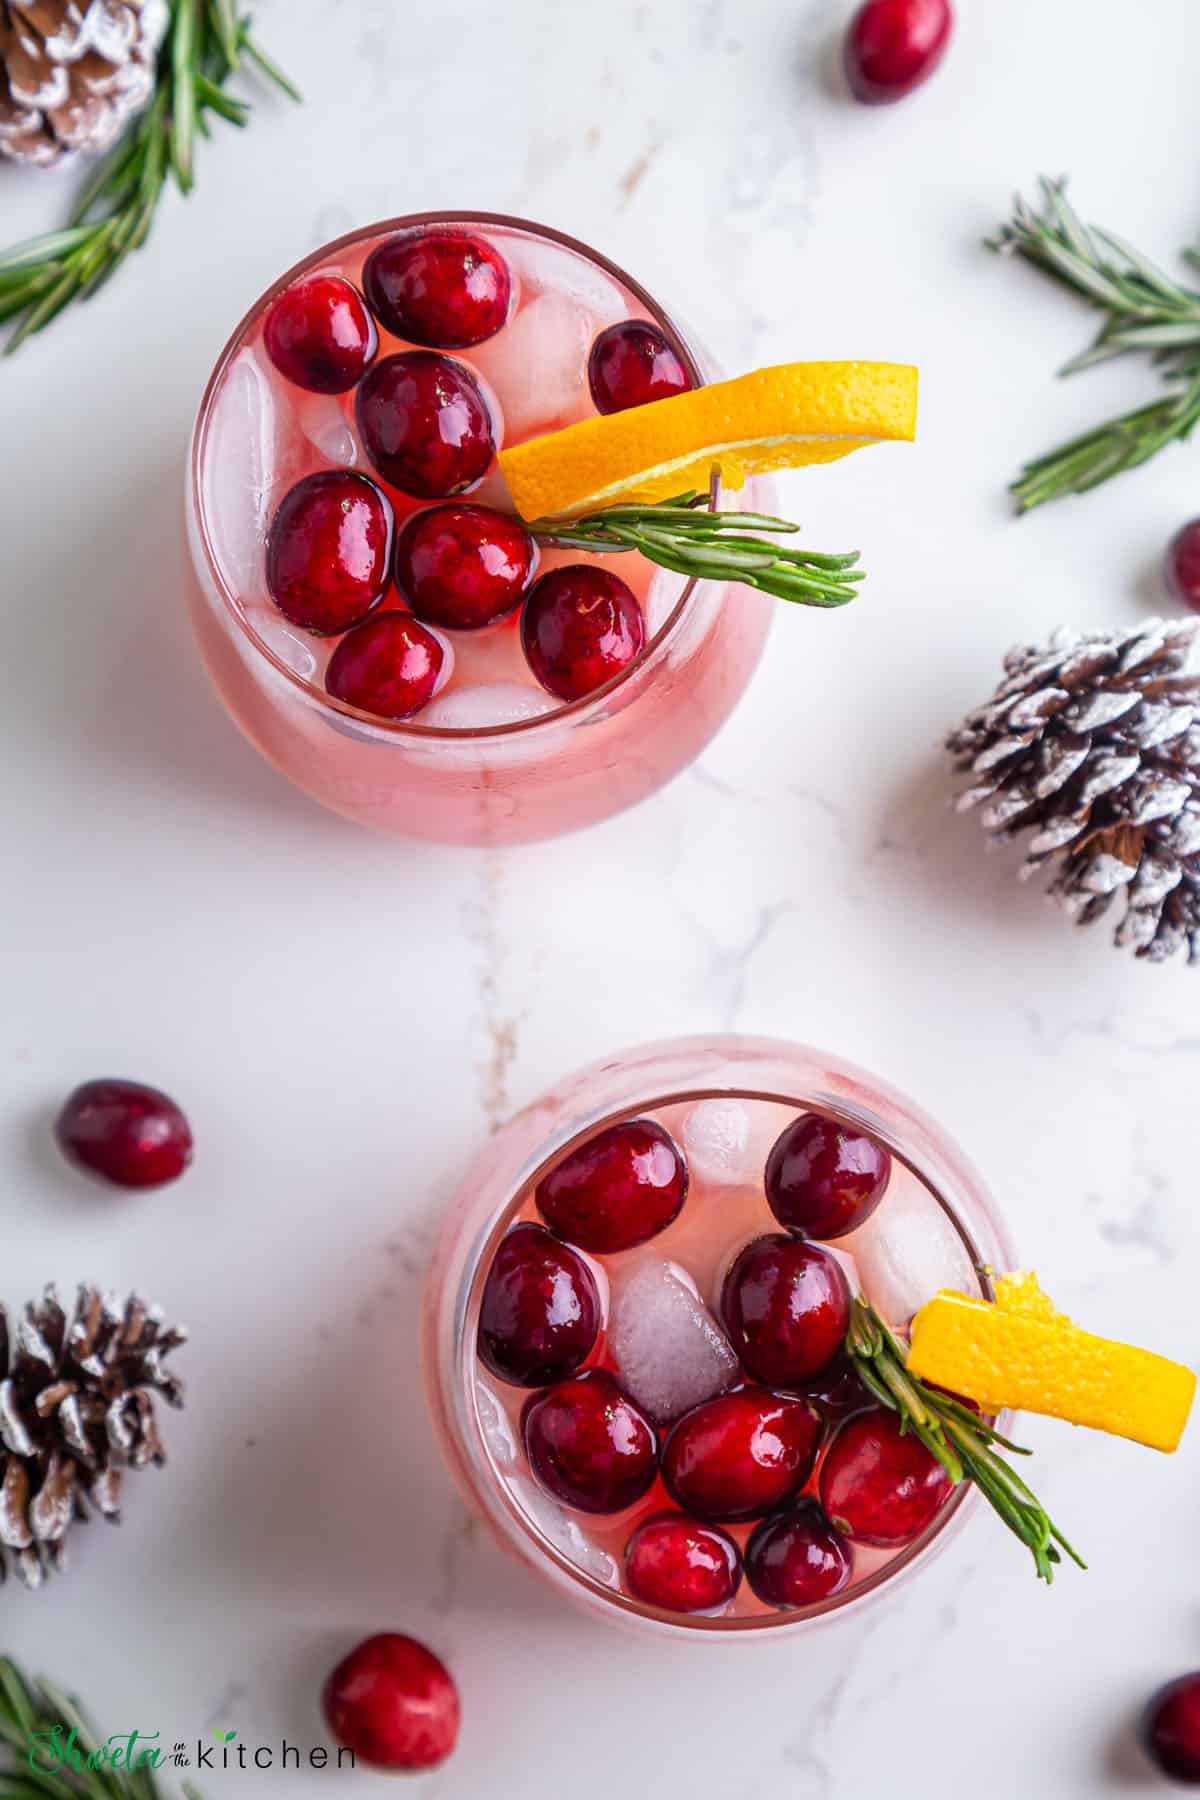 Top view of 2 glasses of Christmas Punch in a glass garnished with cranberries, orange slice and rosemary